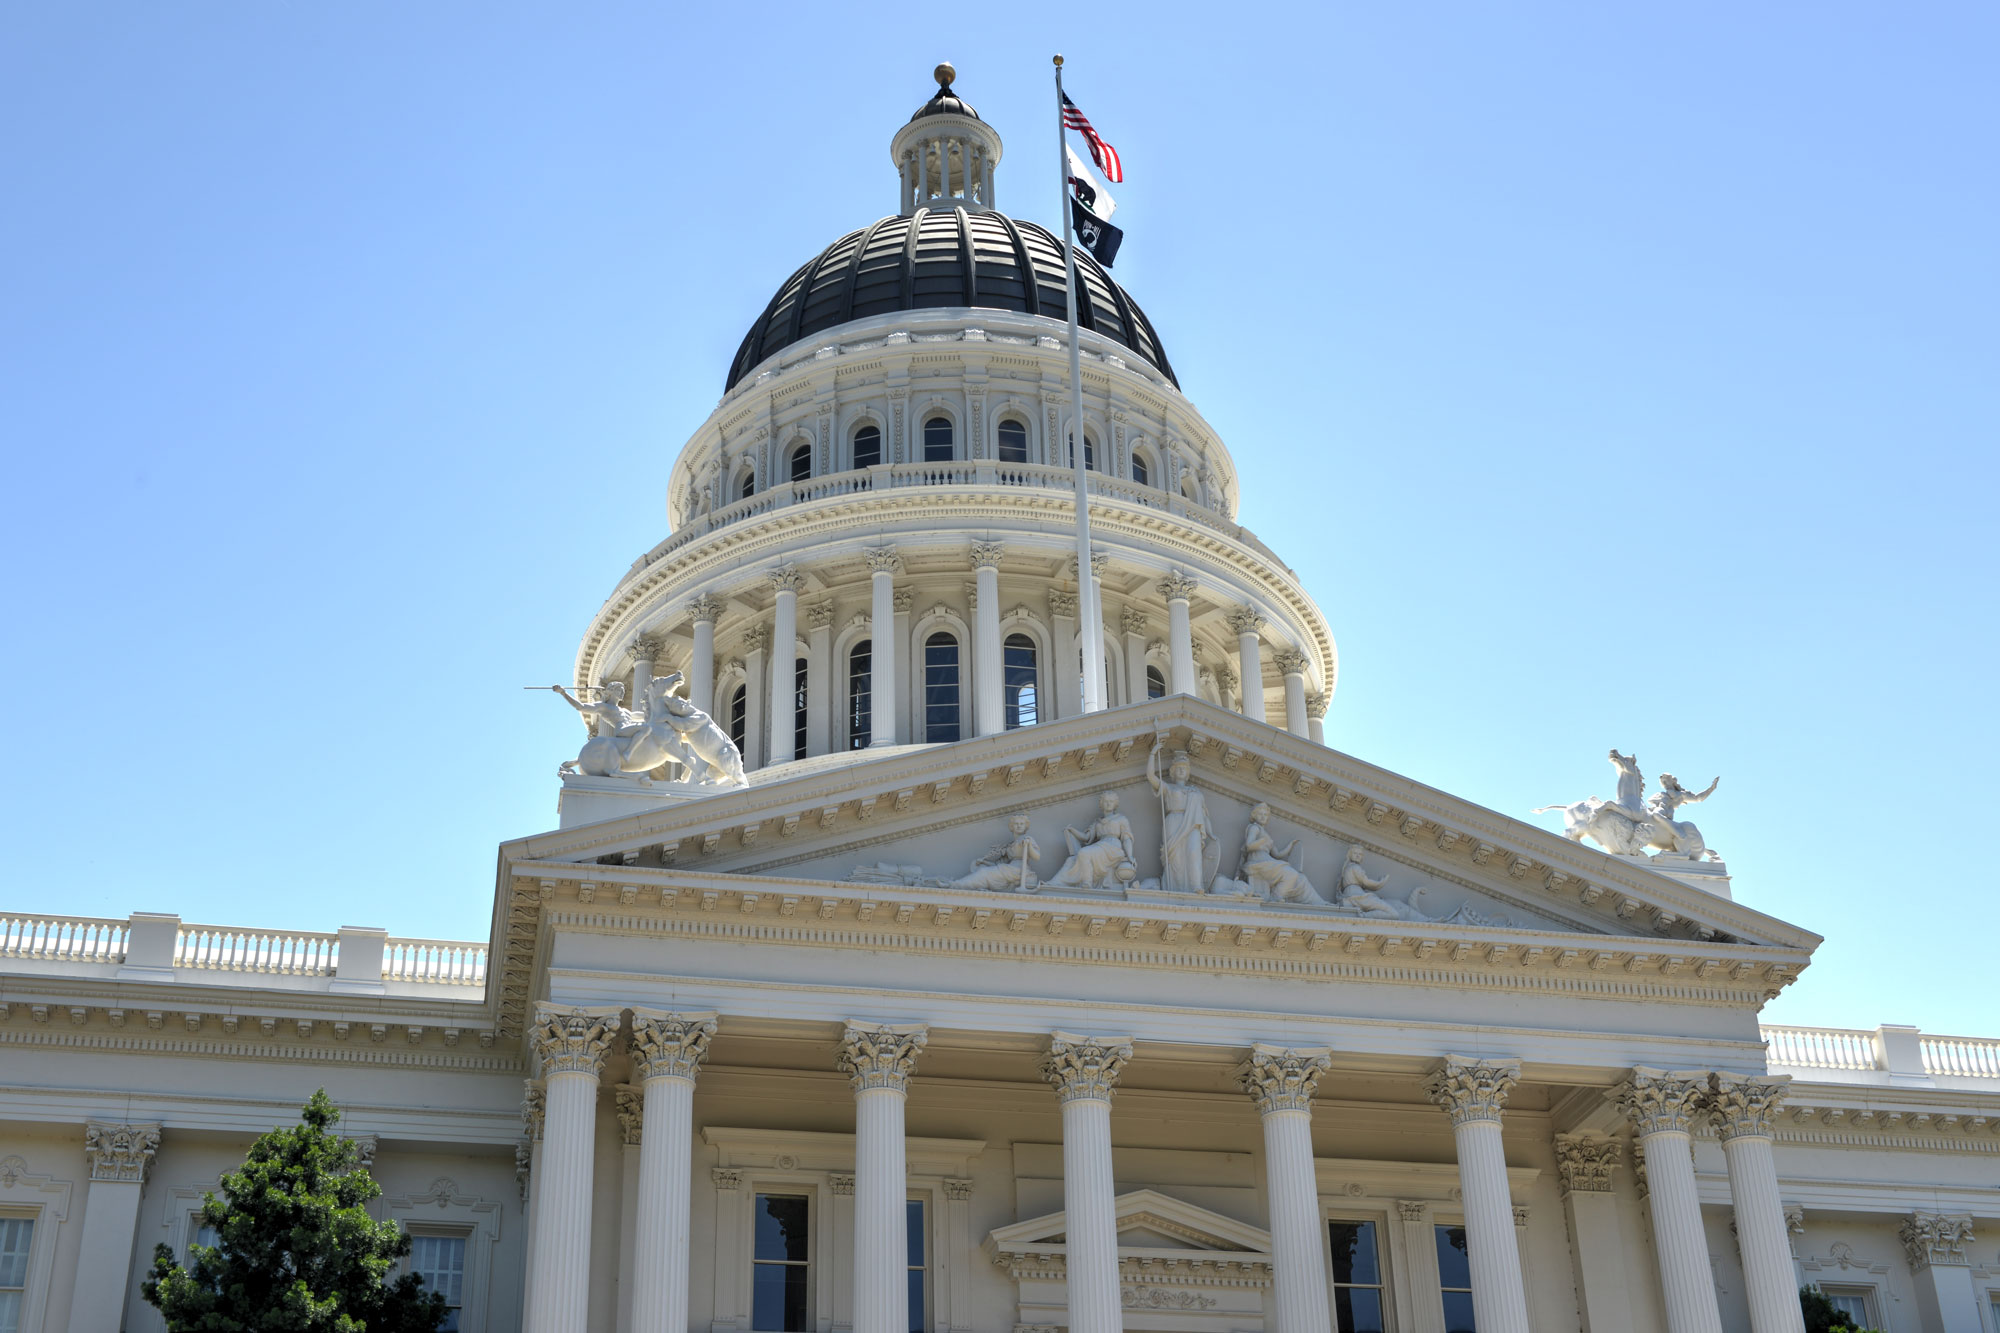 photo - Capitol Building in Sacramento, California with Flags Flying